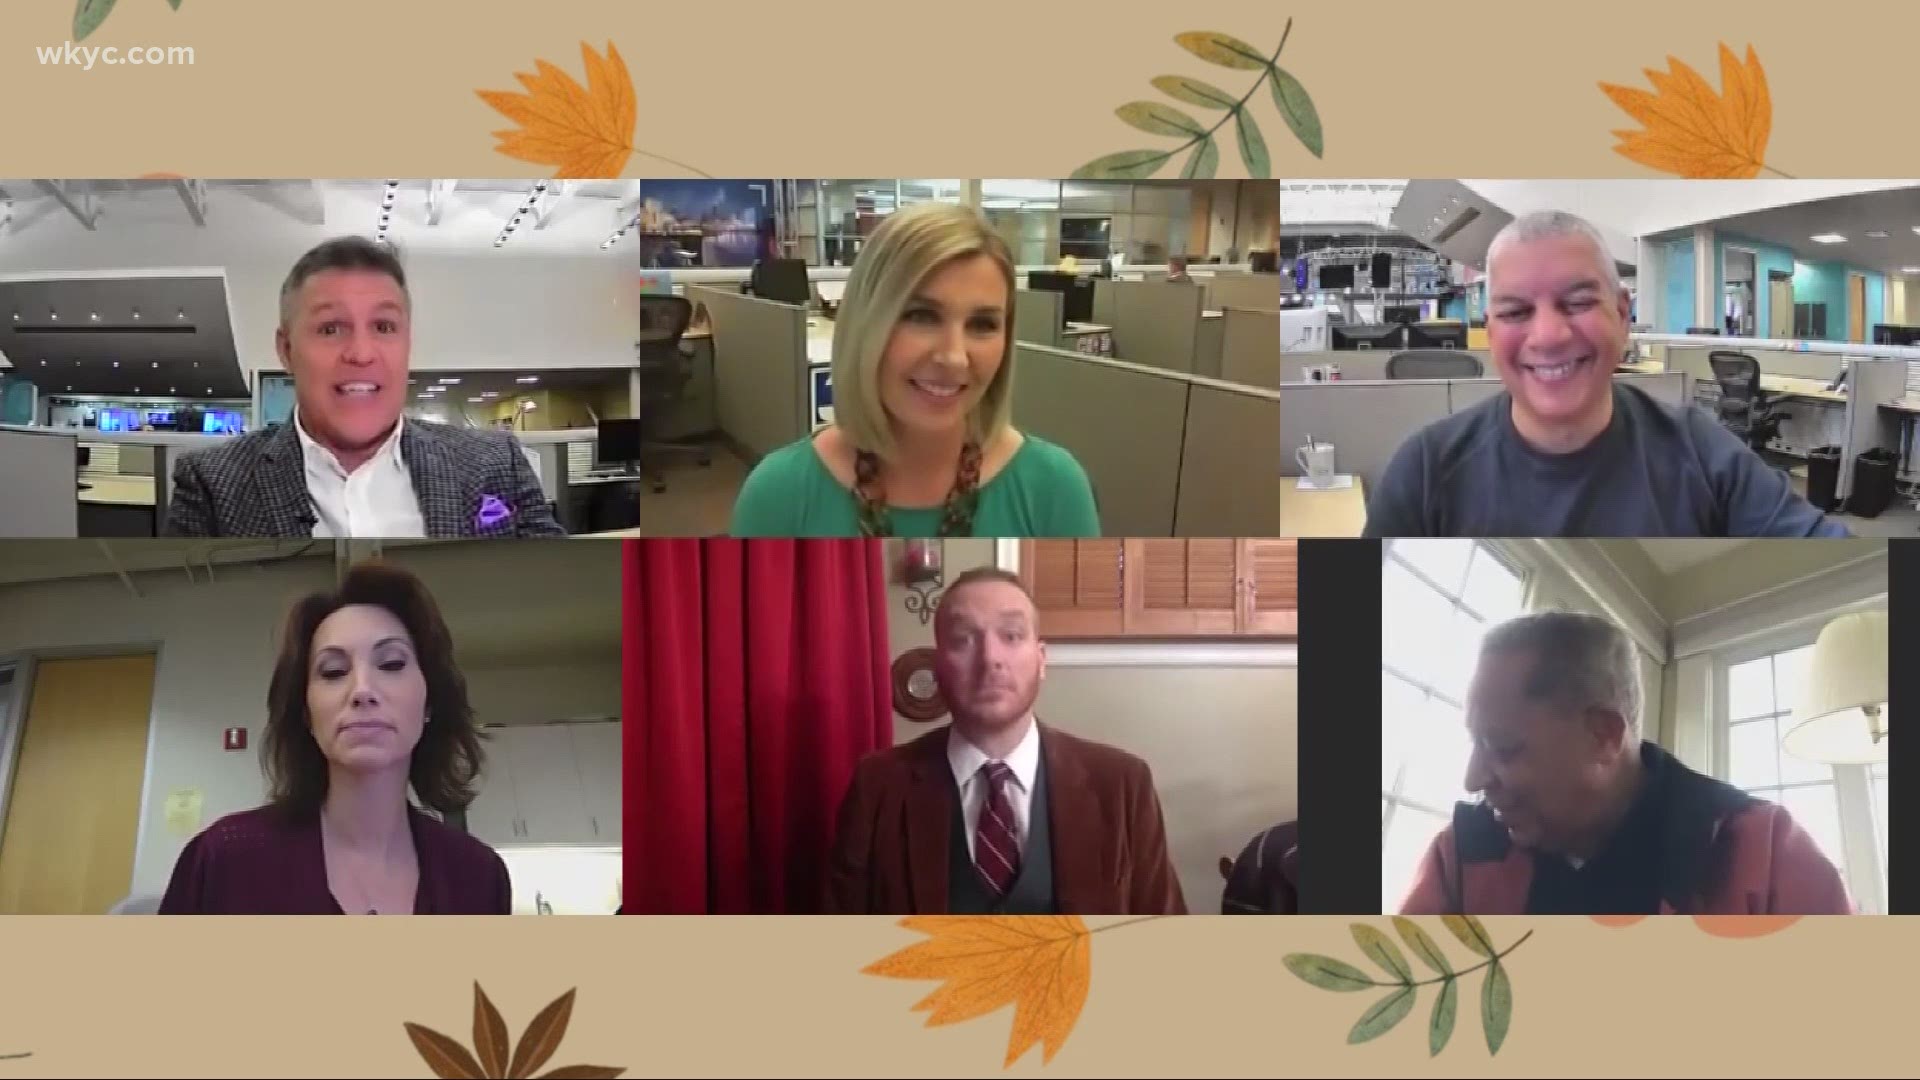 Since it's suggested that we all be apart this Thanksgiving, Mike Polk Jr. has tips to a successful Zoom. Here's a 3News virtual Thanksgiving!